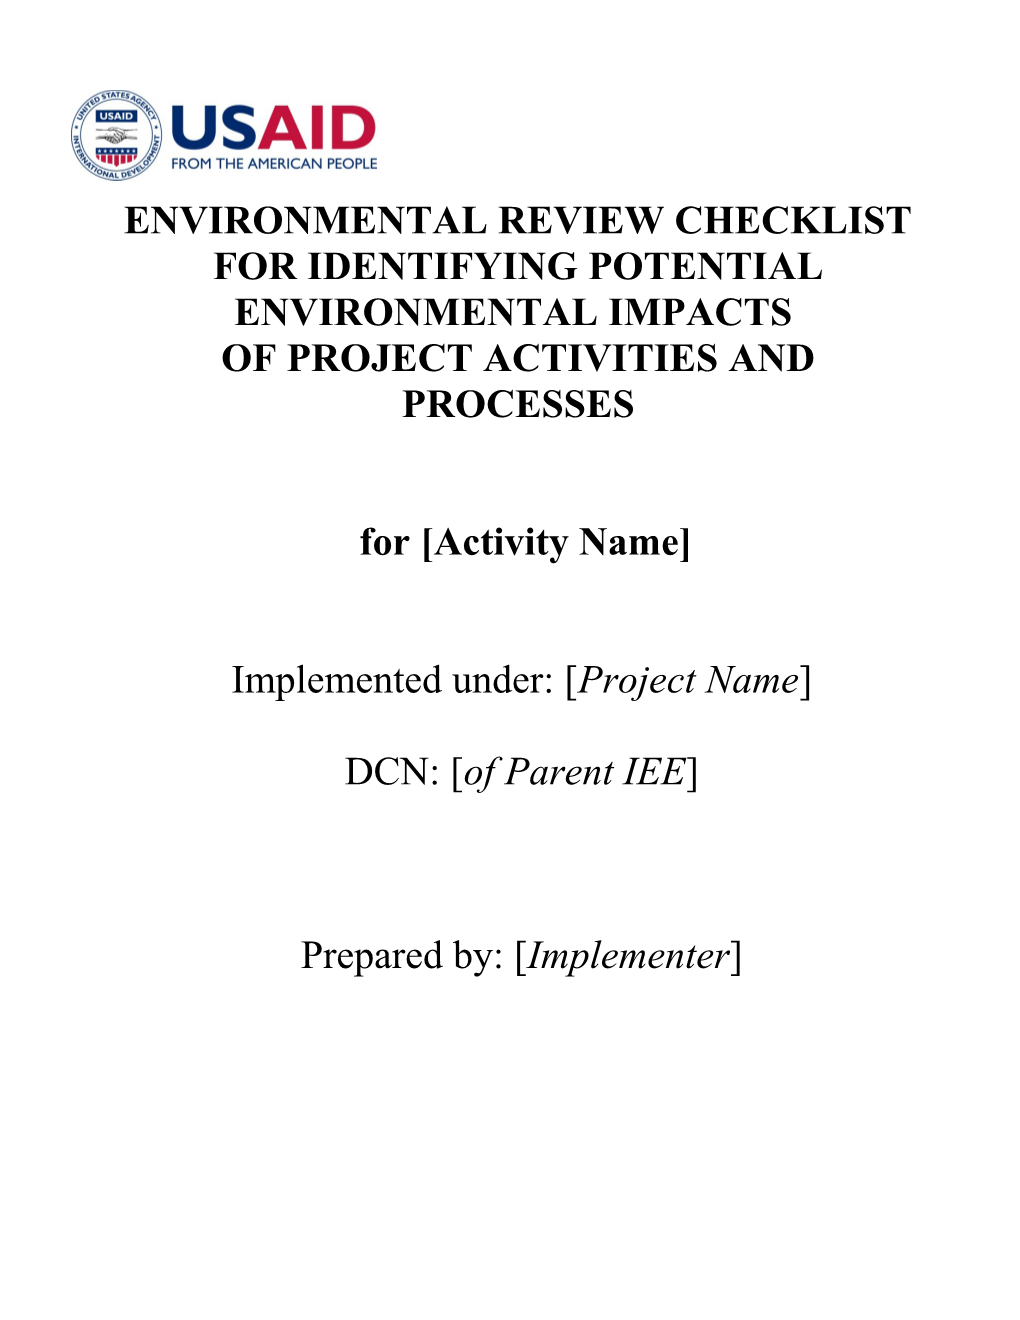 Environmental Review Checklist for Identifying Potential Environmental Impacts